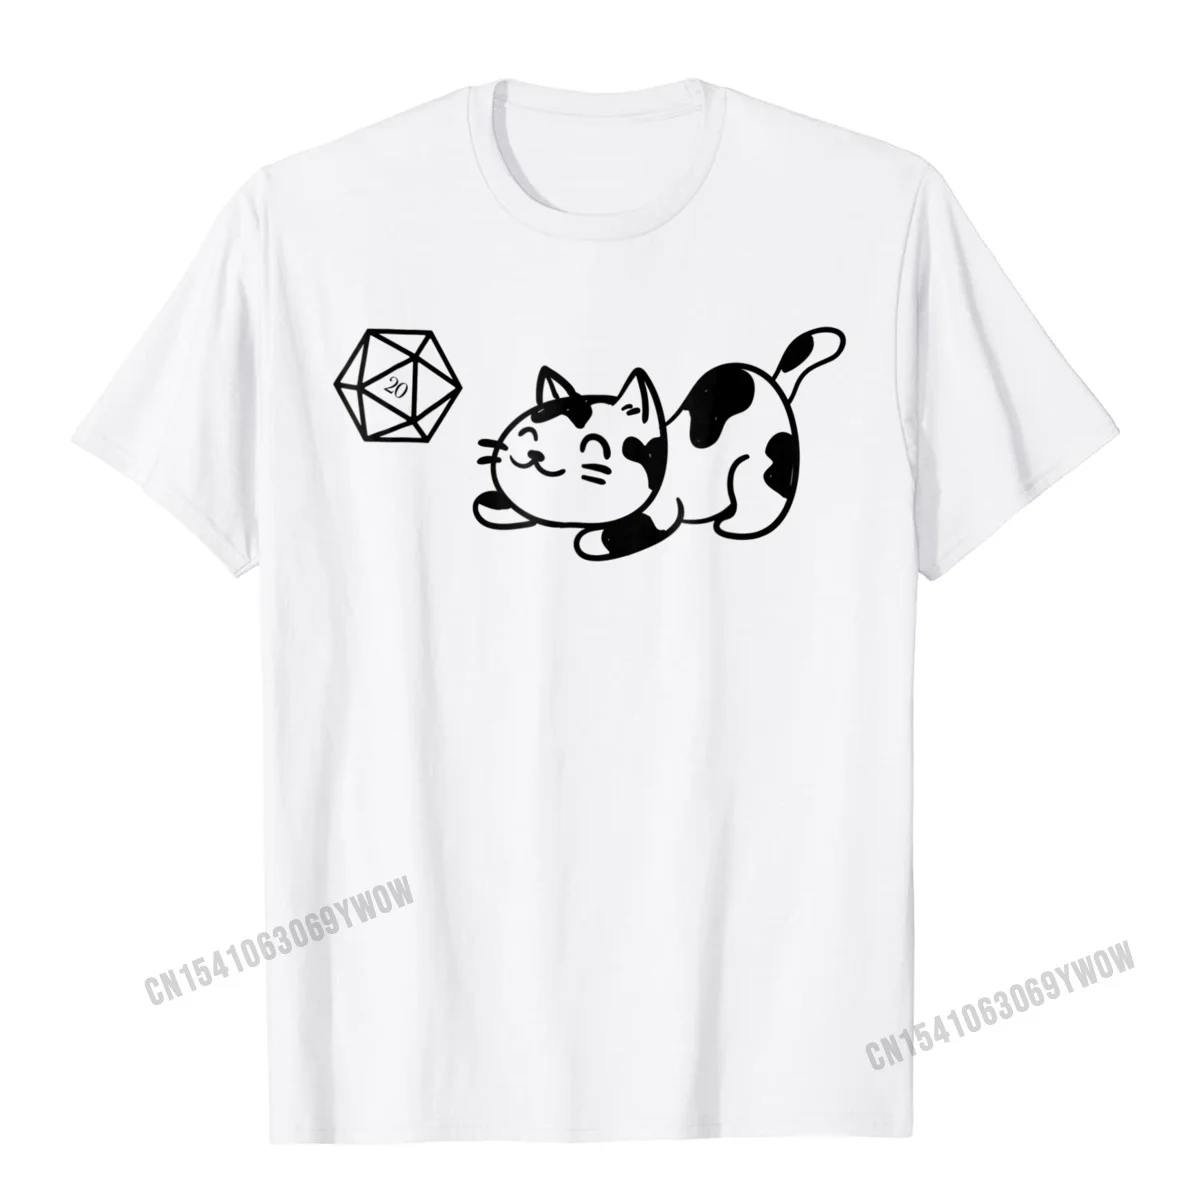 

Nerdy Cat With D20 Dice For Cat Lovers Geeky T-Shirt Camisas Men Mens New Arrival Casual Tops Shirts Cotton Top T-Shirts Printed